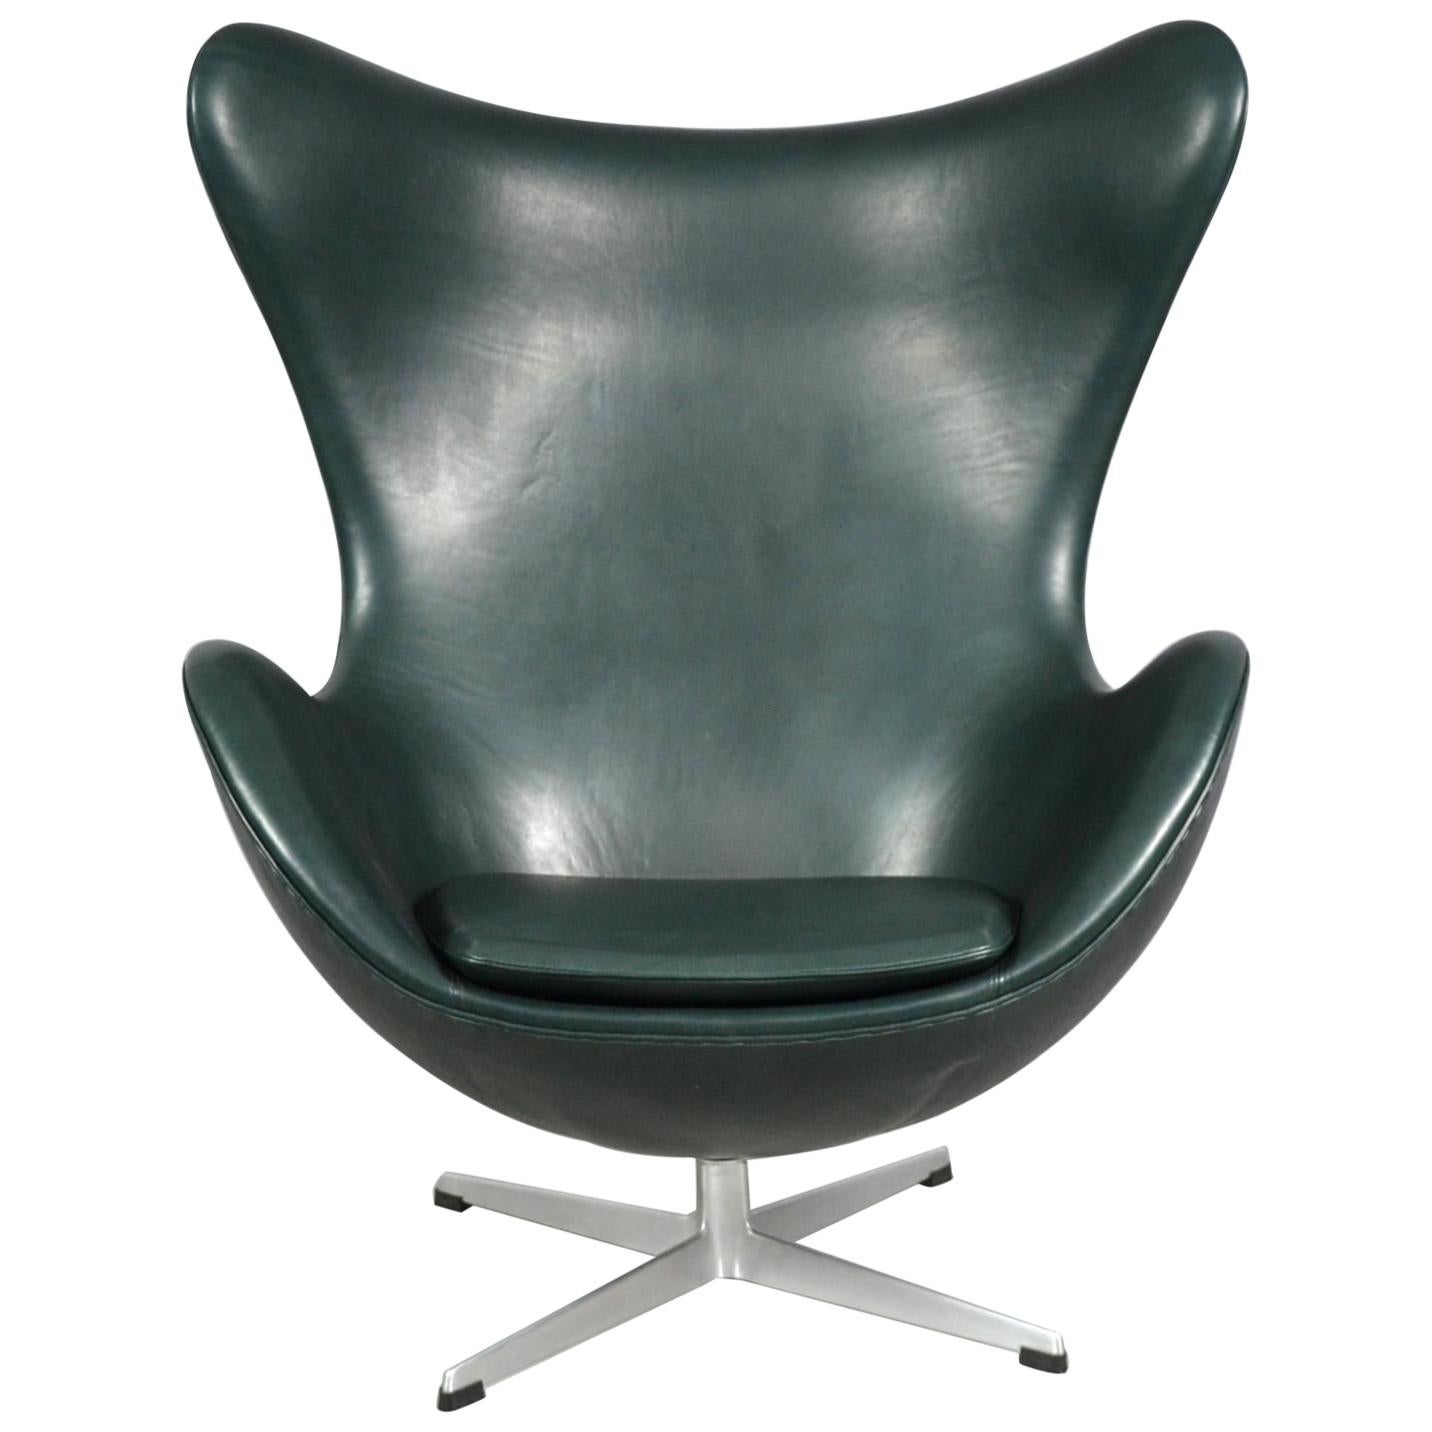 Leather Egg Chair by Arne Jacobsen for Fritz Hansen, 1970s New Green Leather